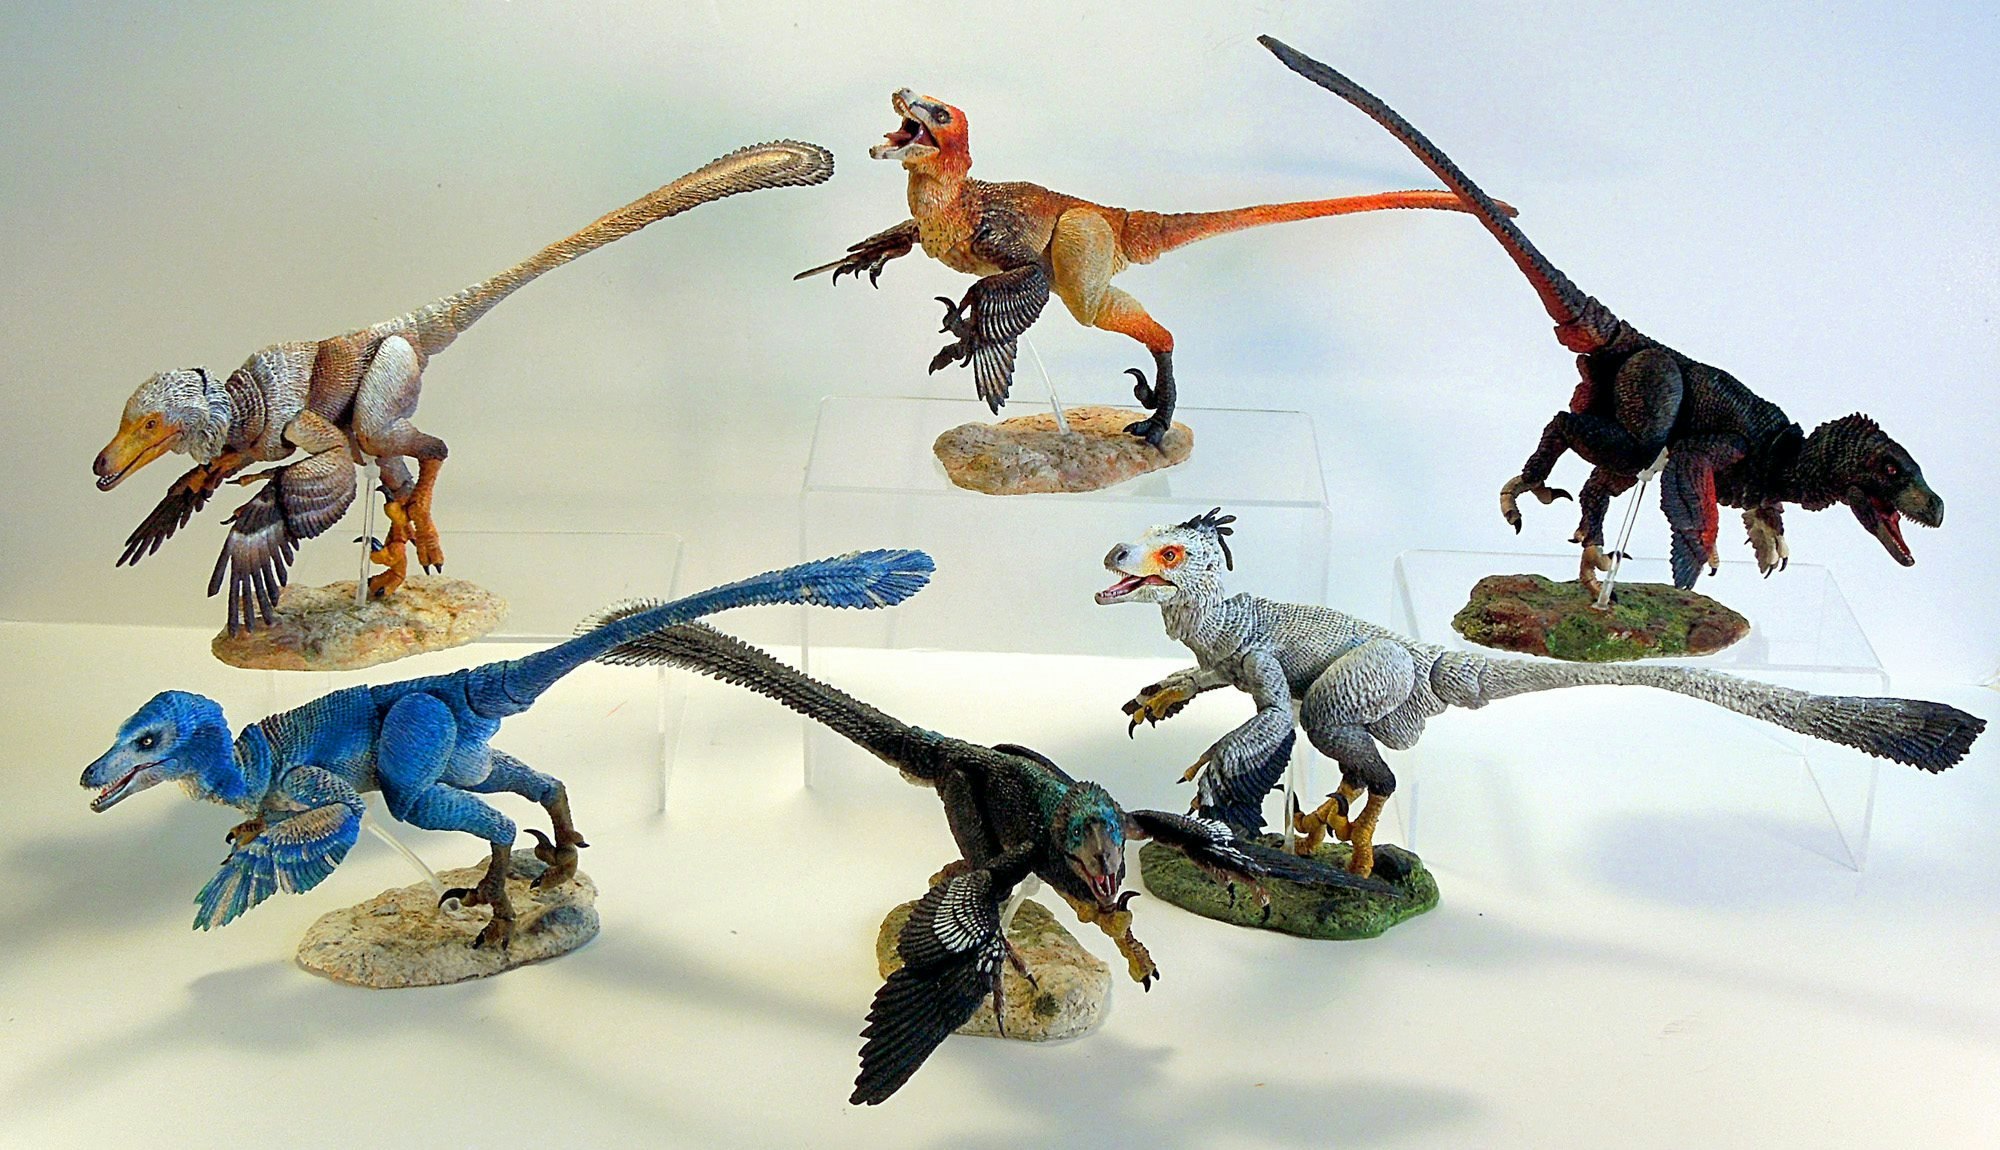 Dinosaur Toys for Adults are Just the Best